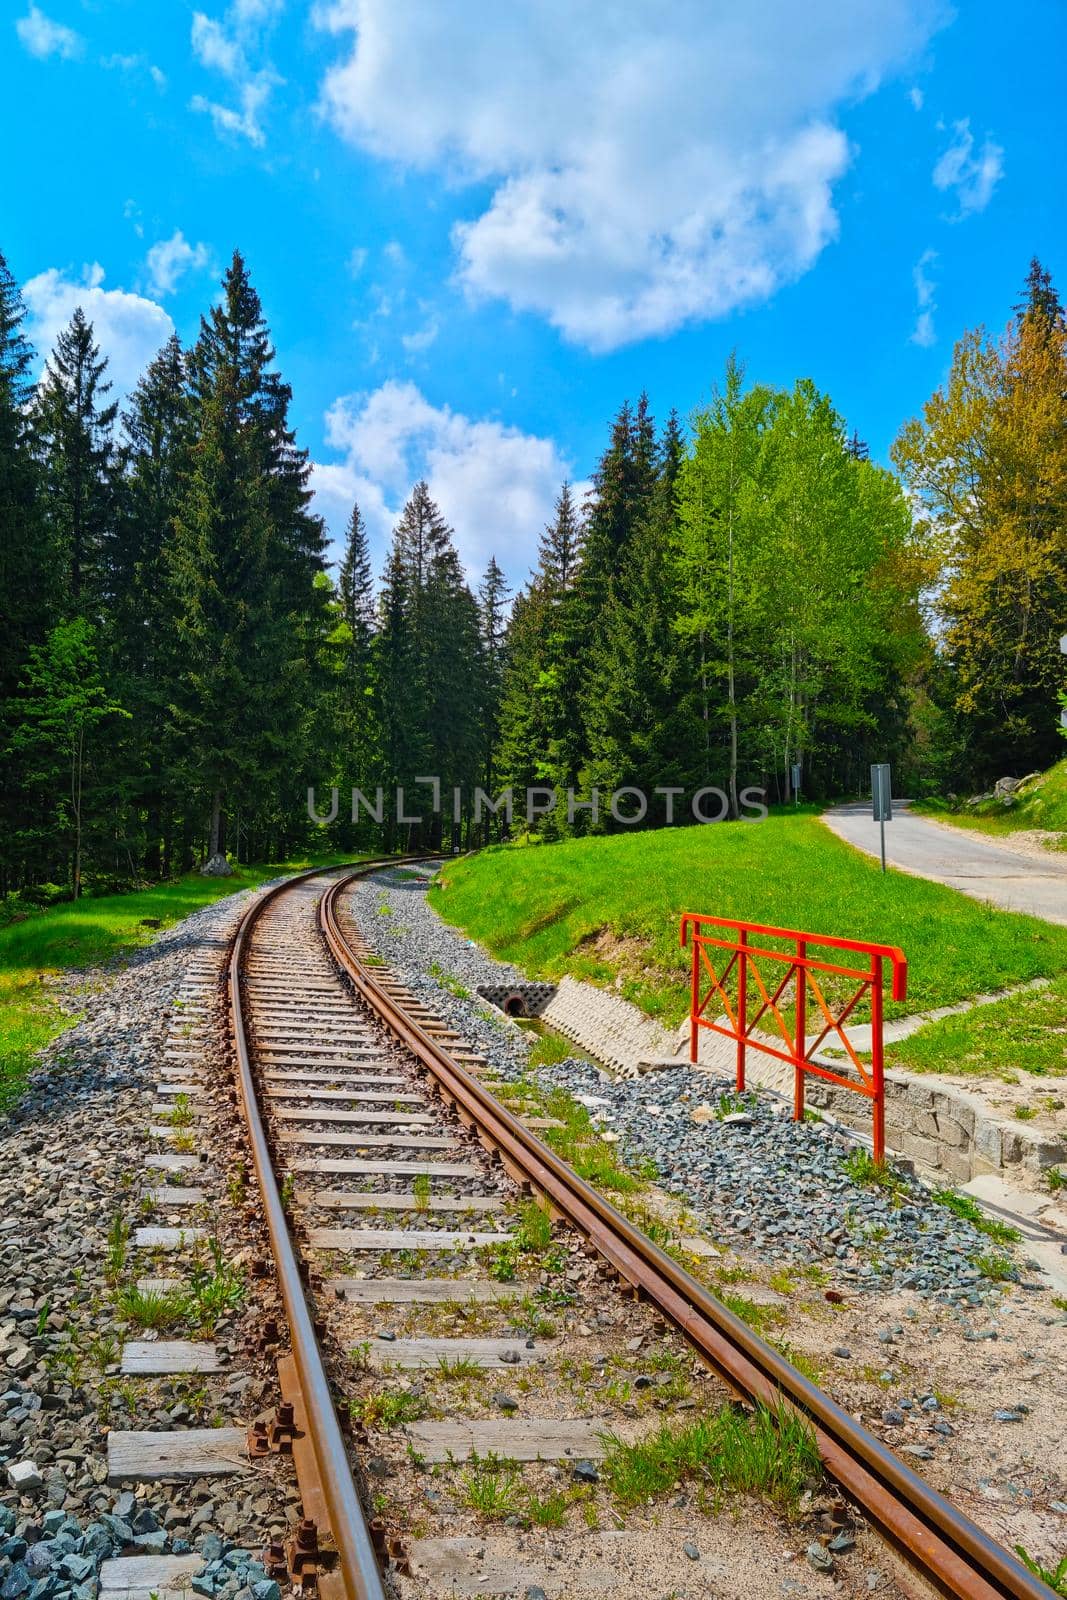 A picturesque railway track through a green forest